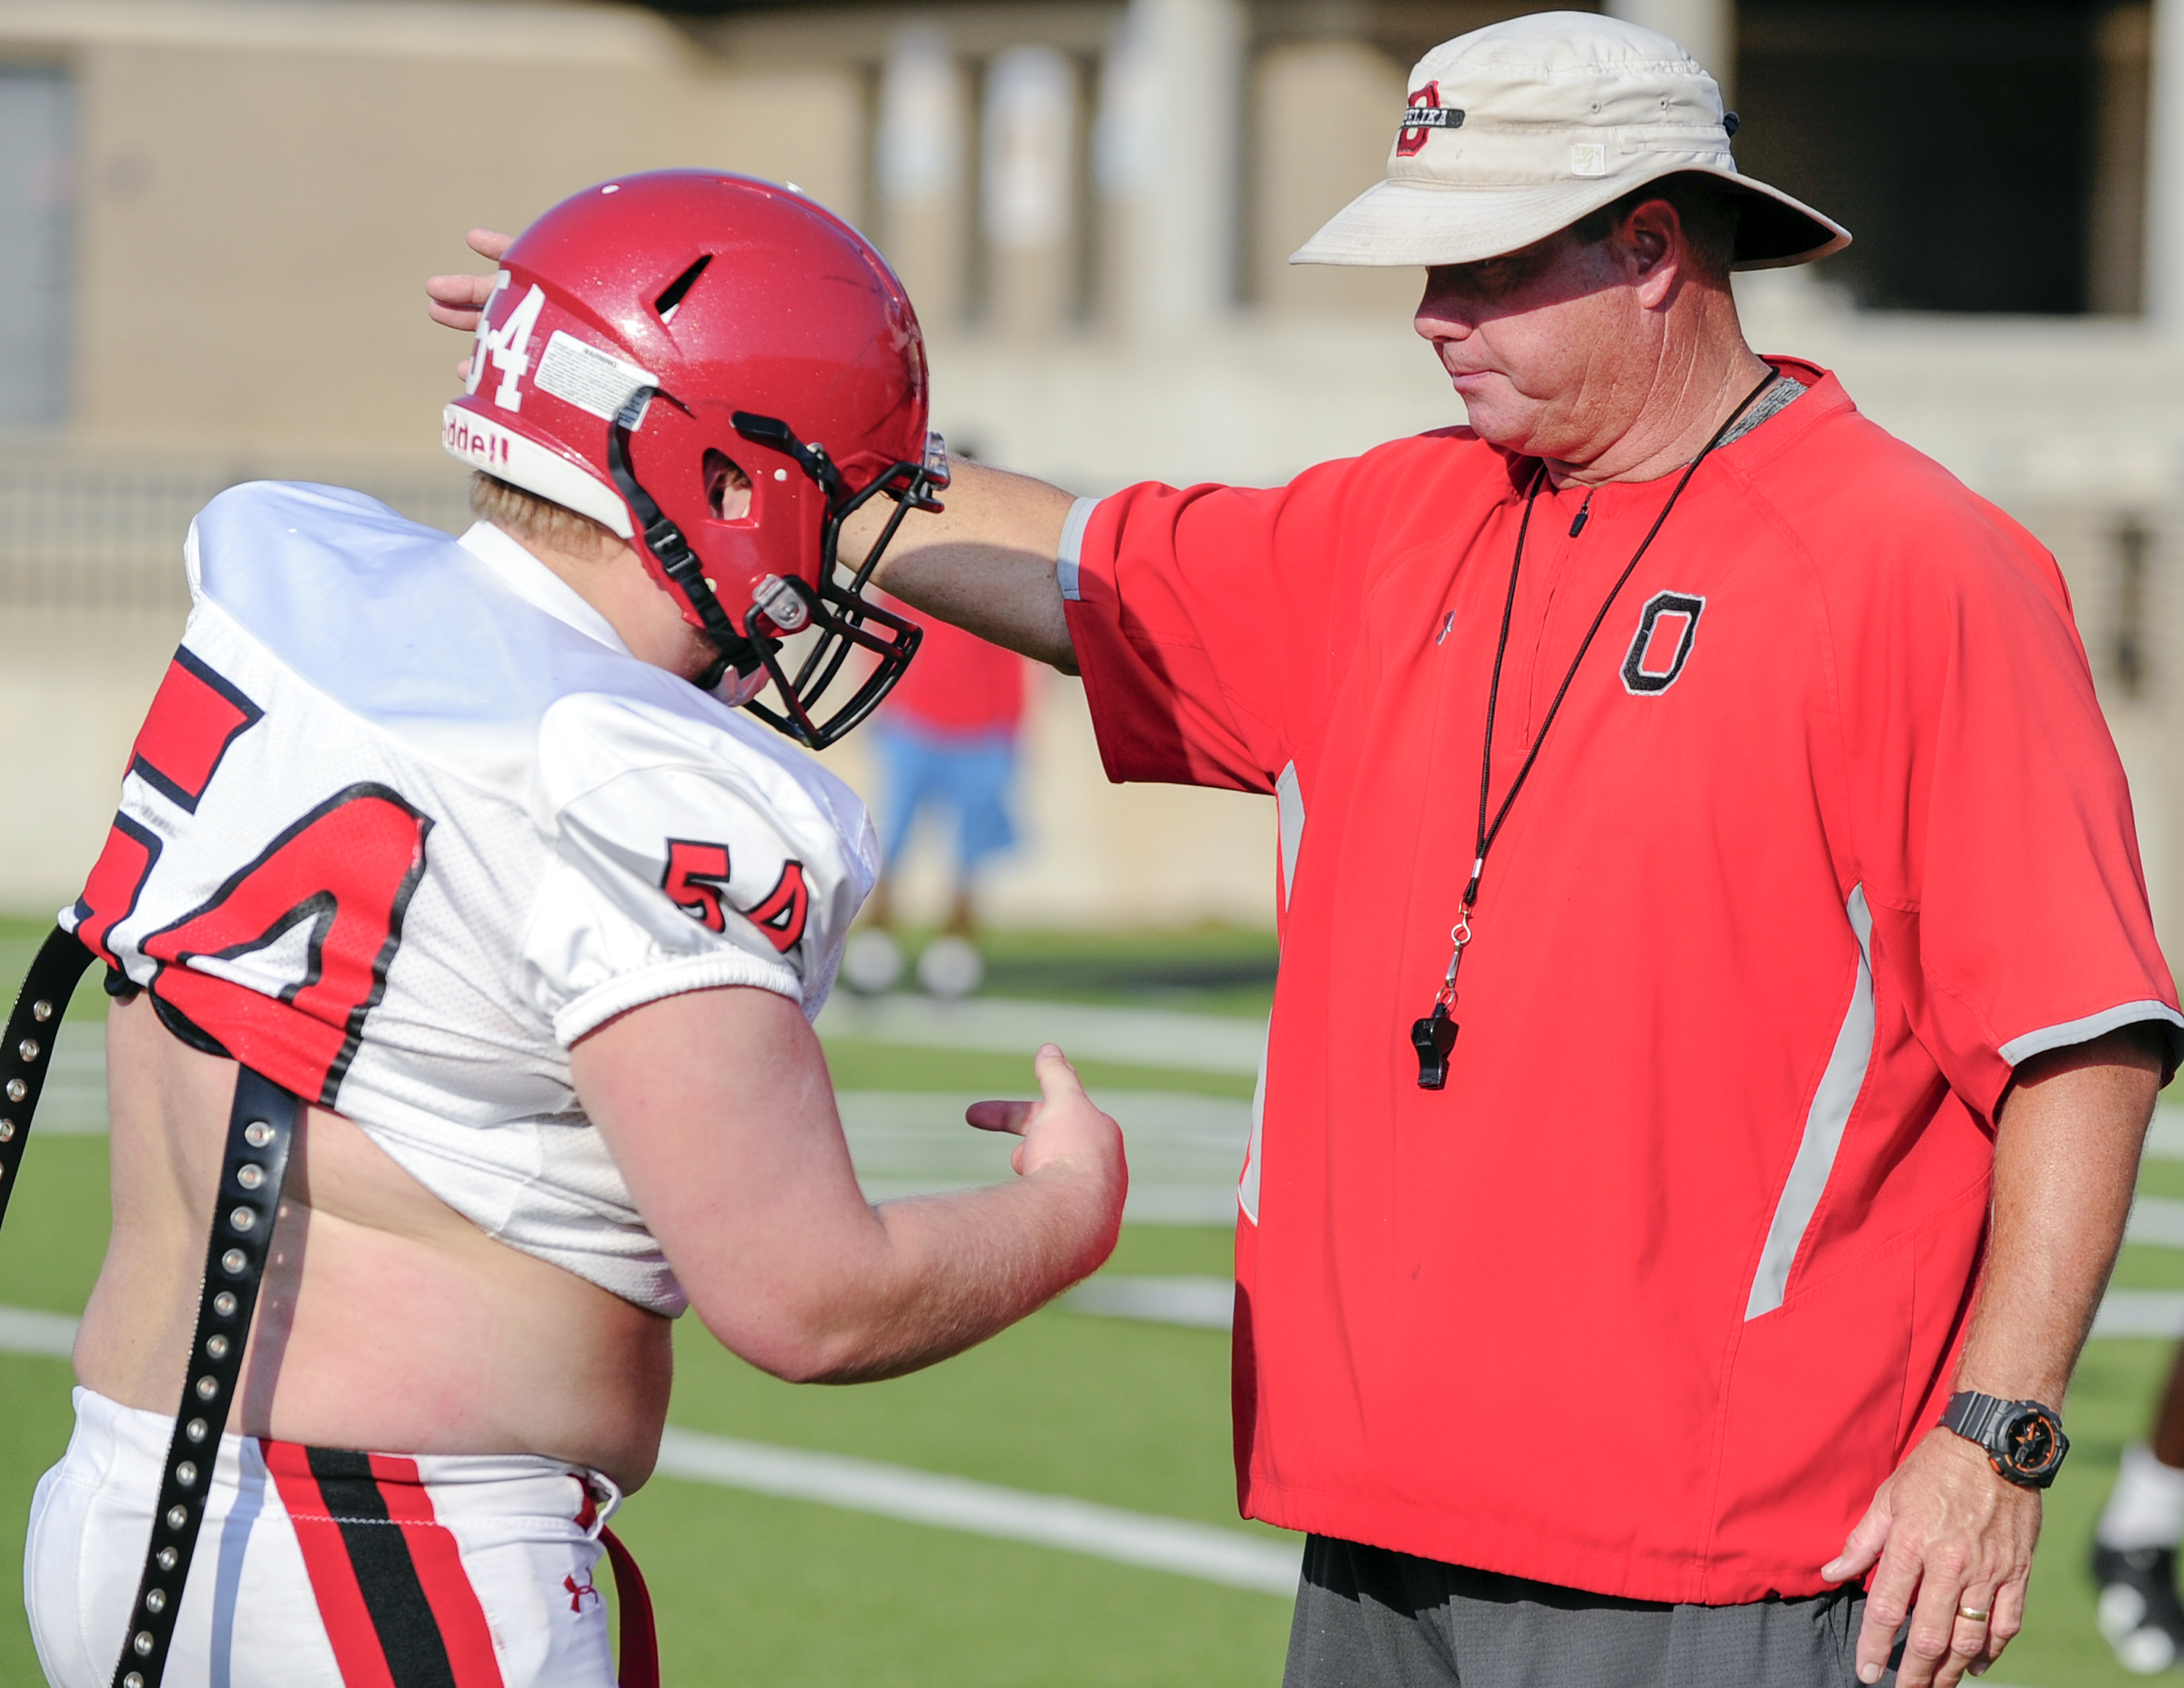 Opelika’s Buster Daniel to be next head coach at Valley High School